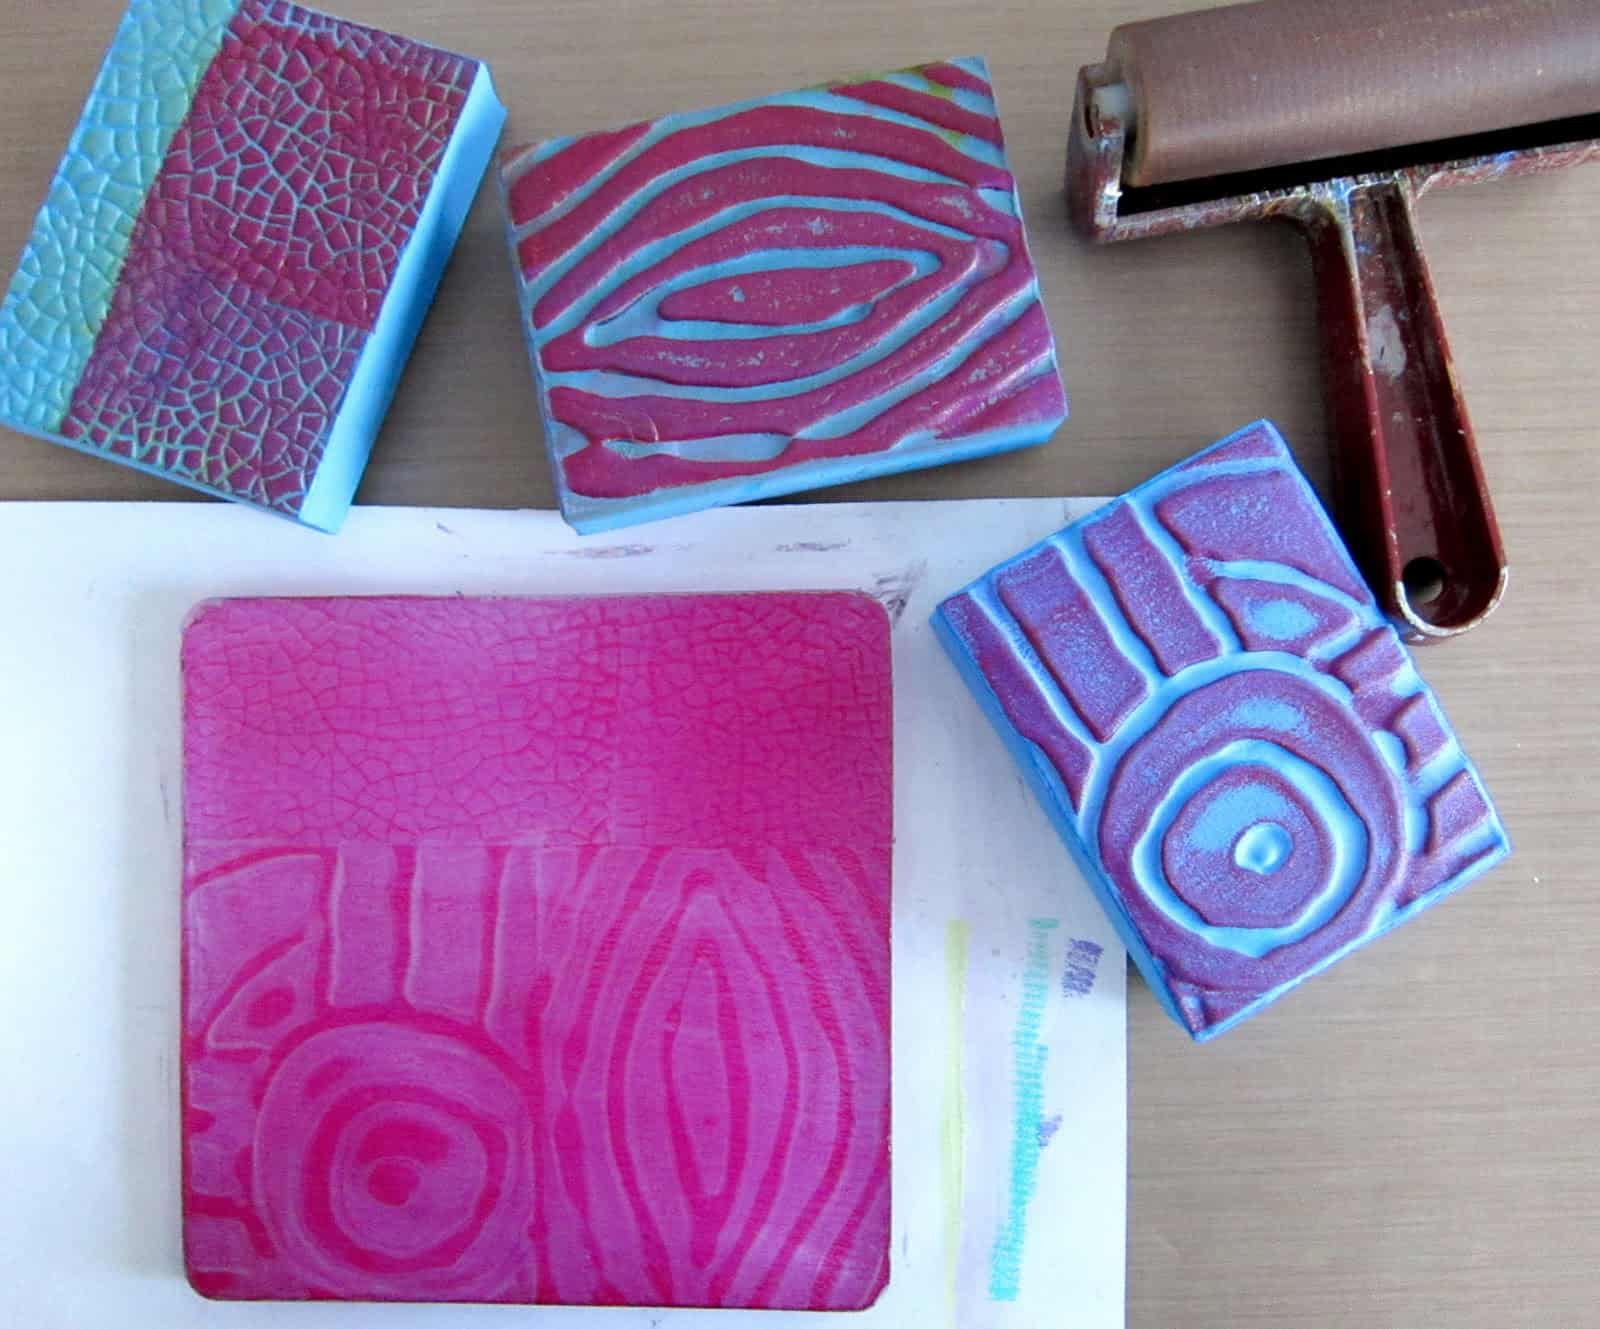 Glue stamps